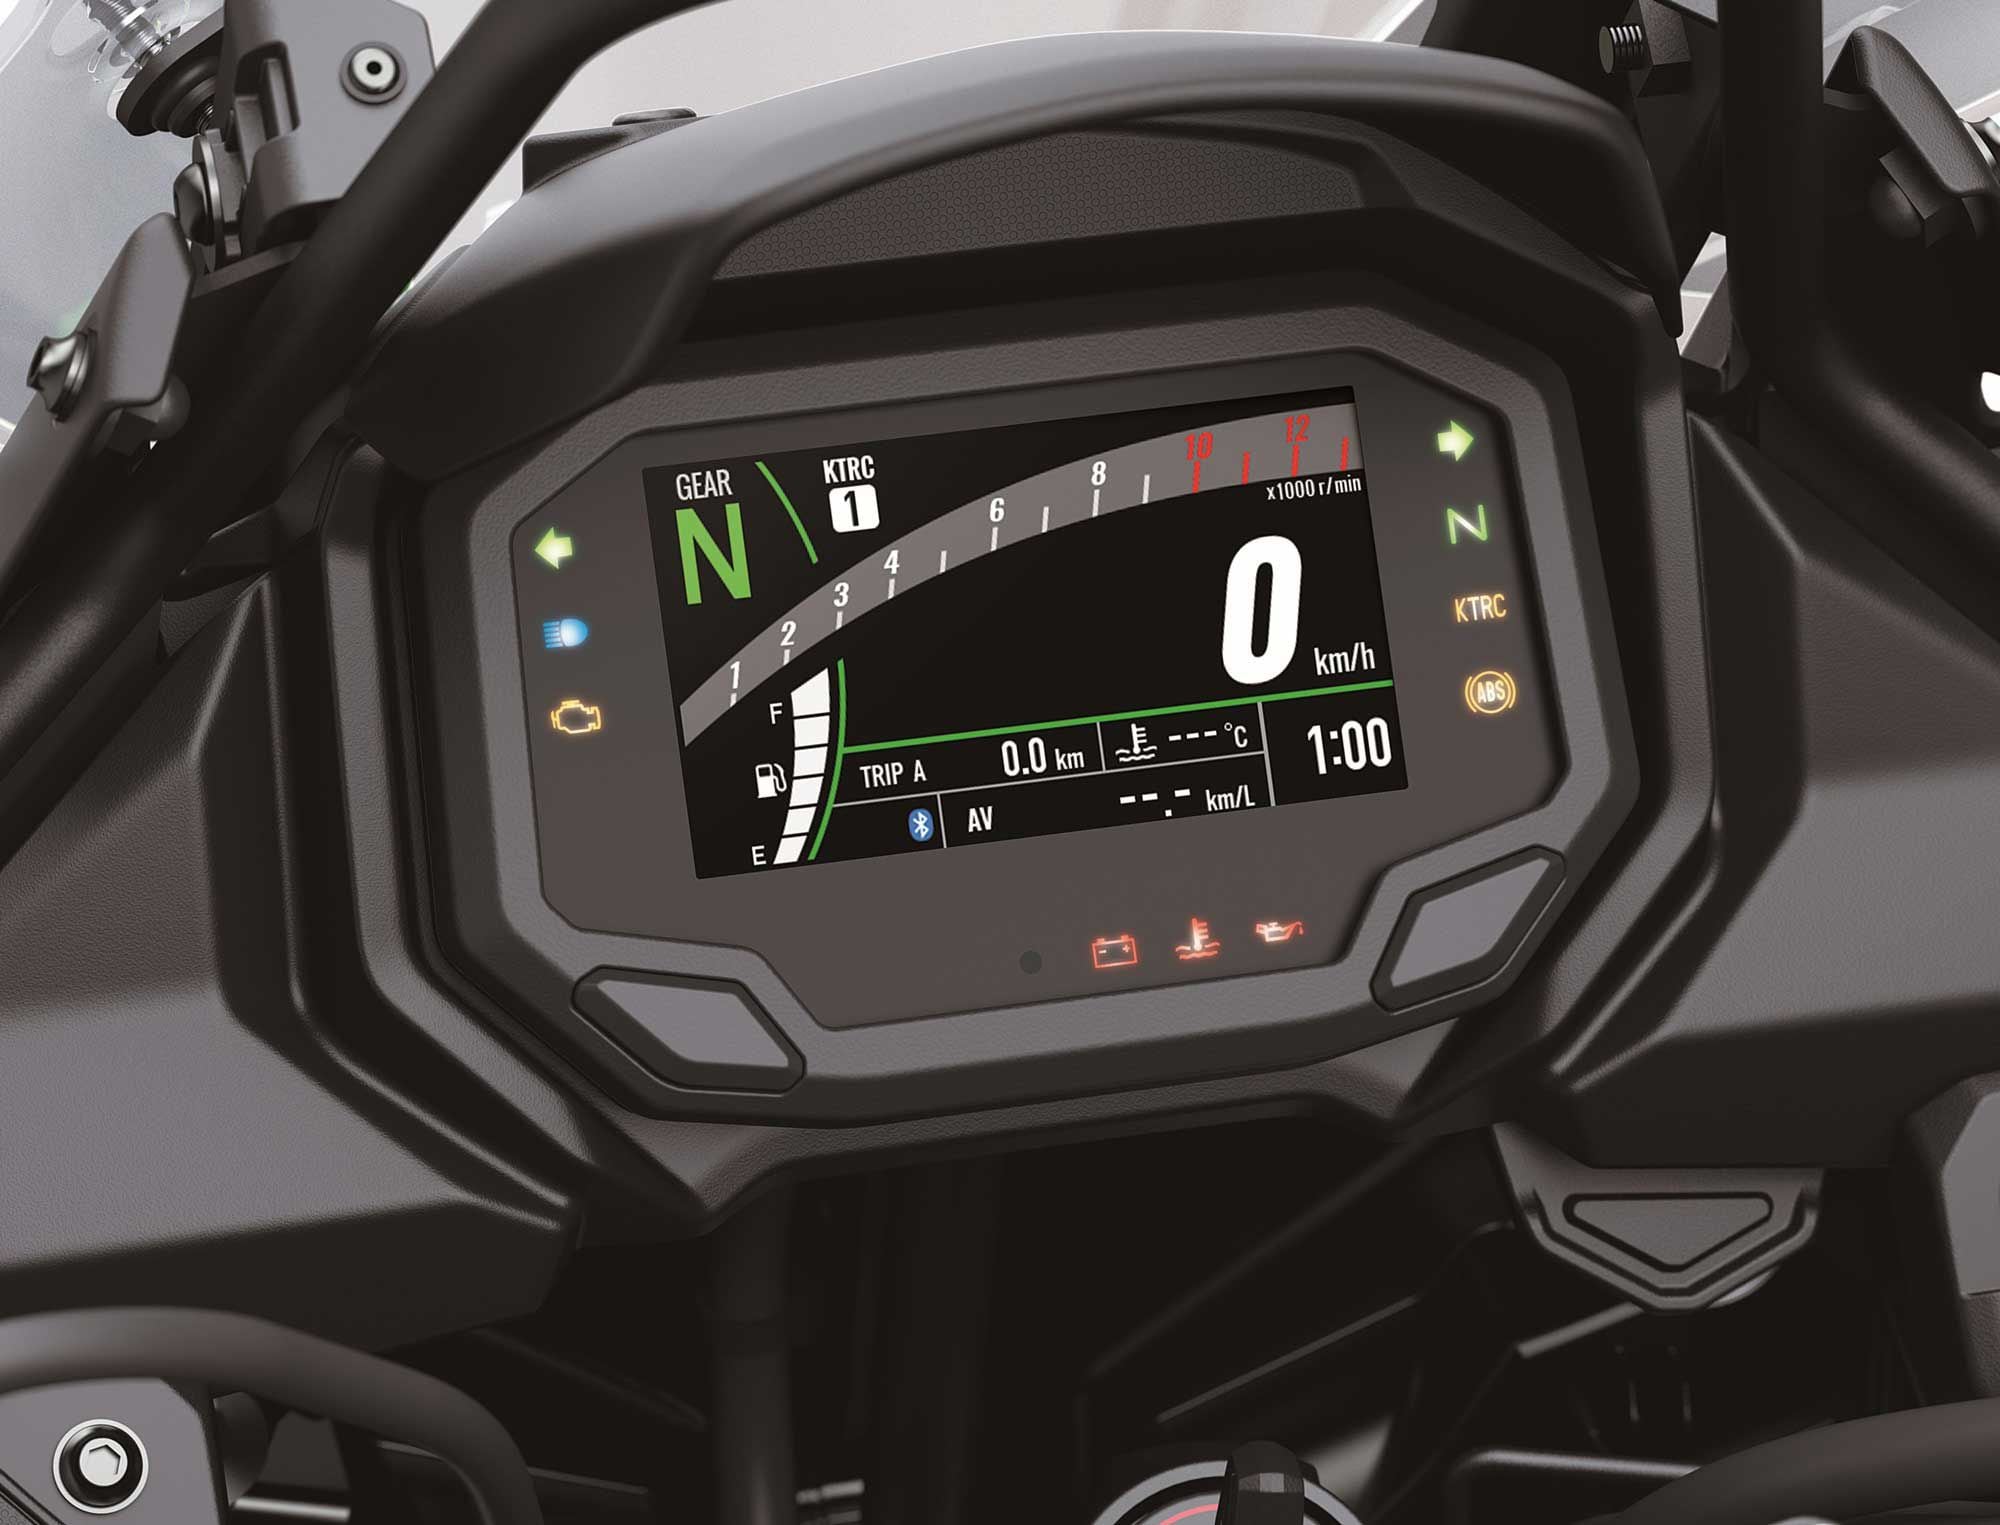 The 4.3-inch TFT display adjusts brightness automatically and shows a variety of functions including traction control modes.